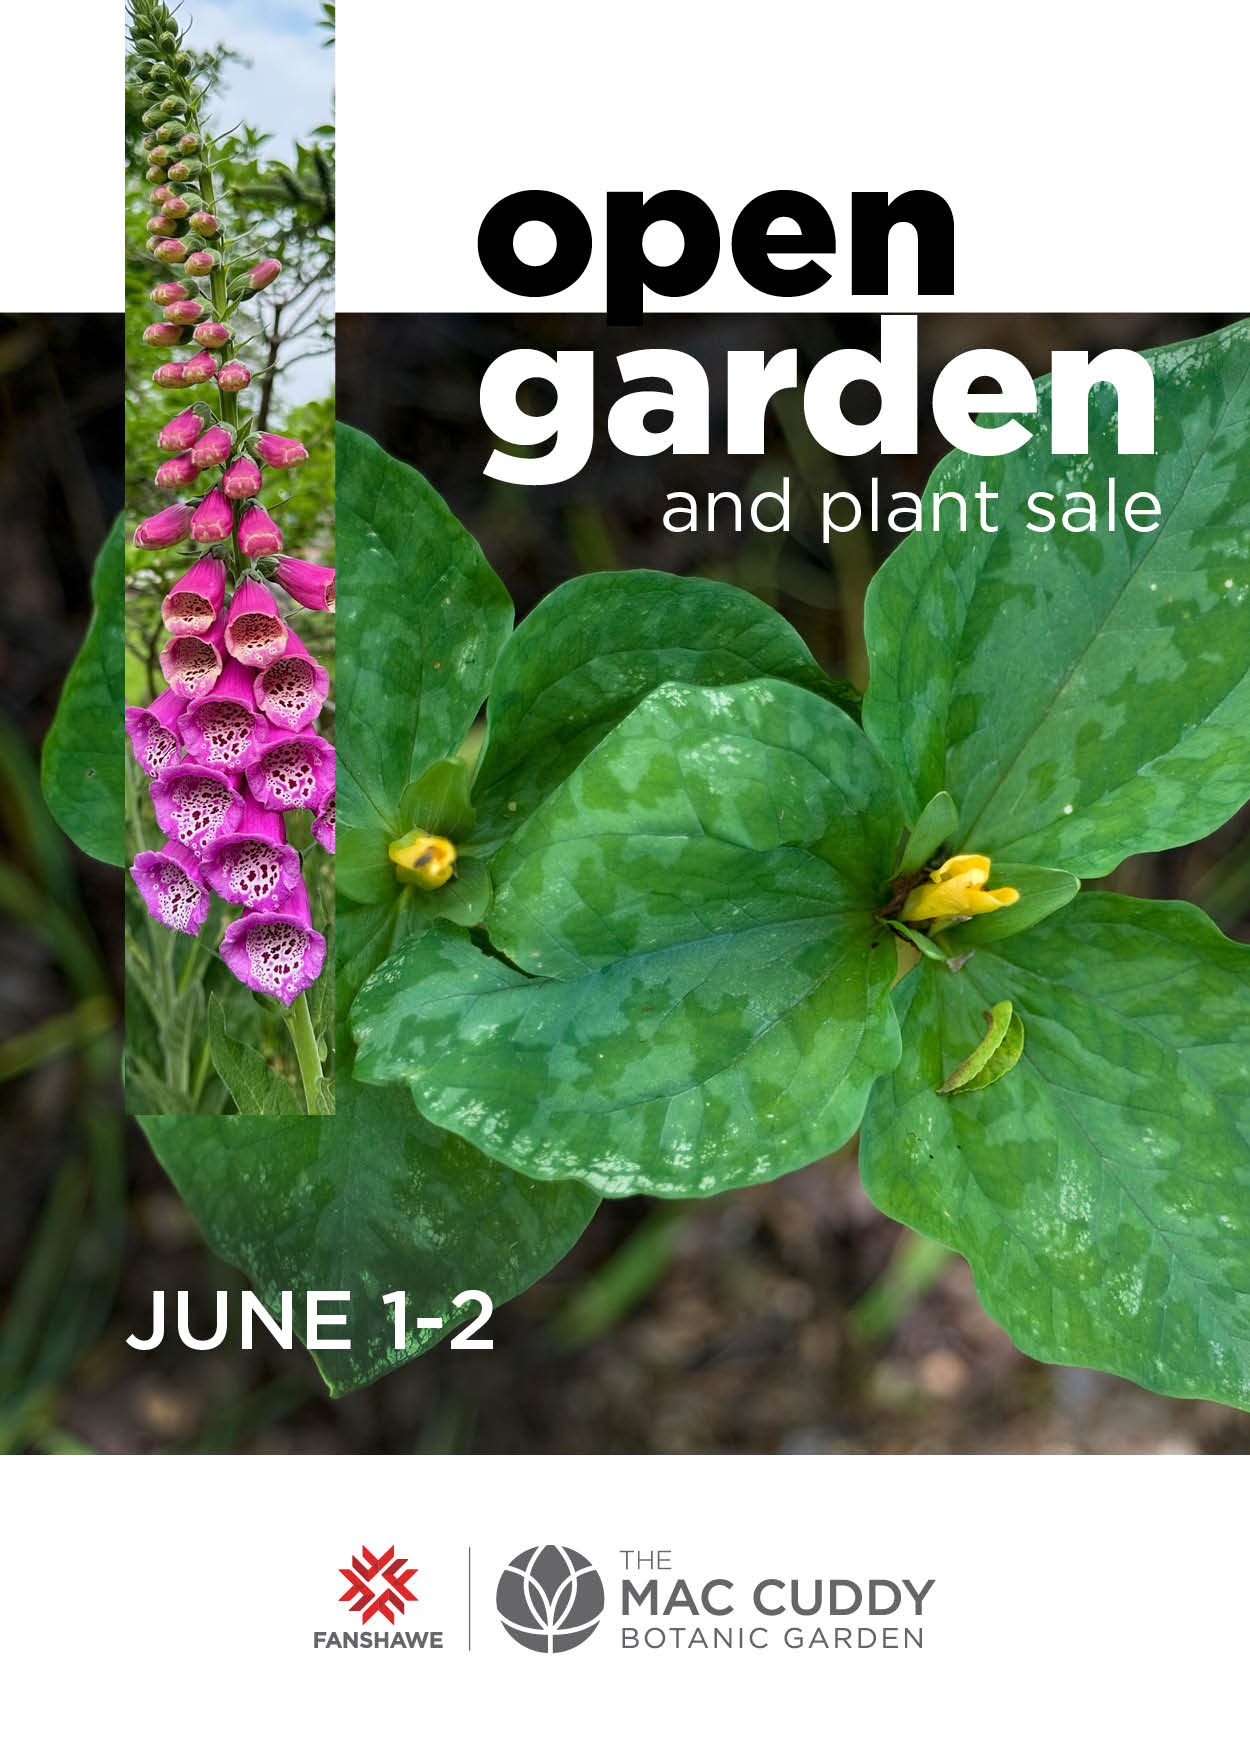 open garden and plant sale June 1-2 presented by Fanshawe and The Mac Cuddy Botanic Garden